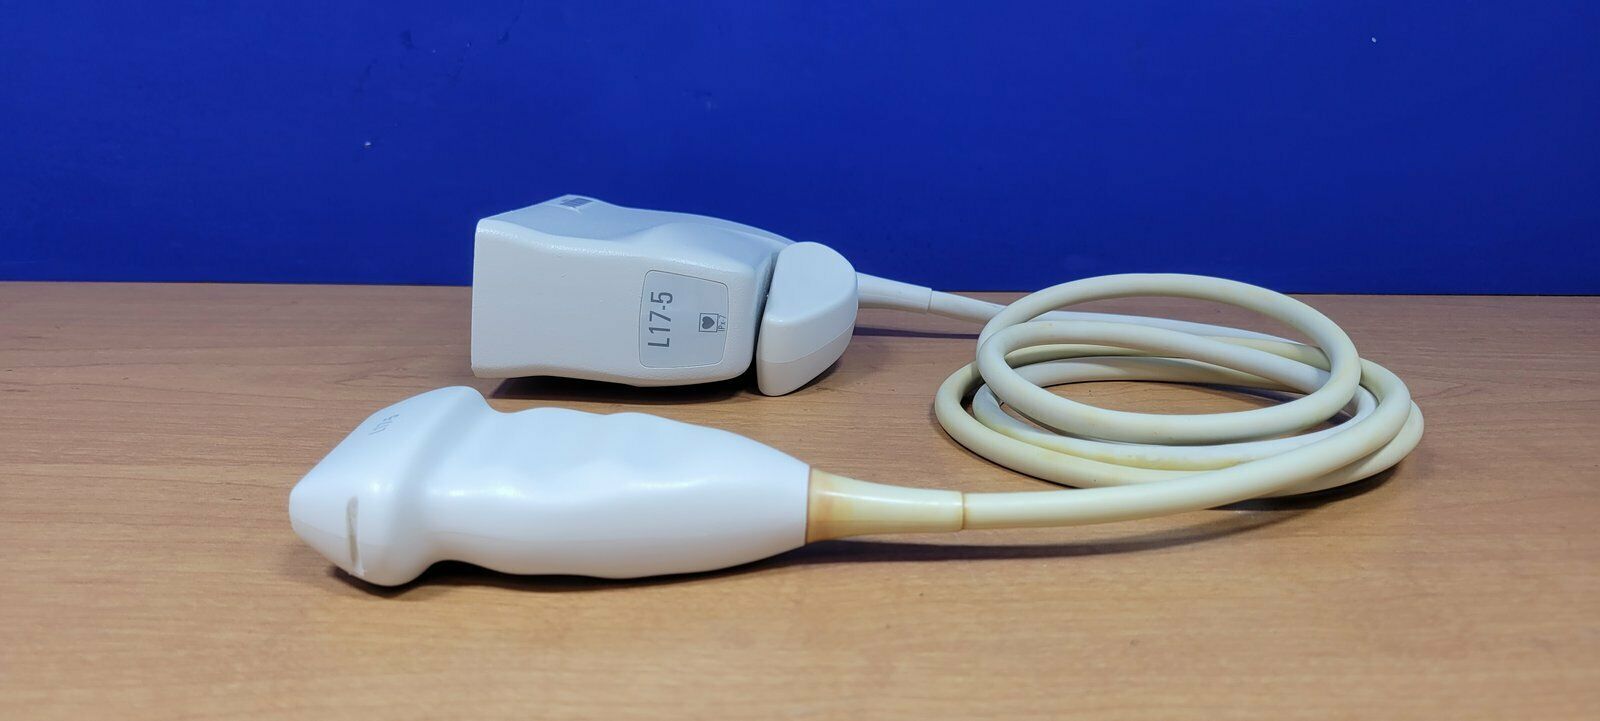 PHILIPS L17-5 LINEAR ARRAY ULTRASOUND TRANSDUCER PROBE DIAGNOSTIC ULTRASOUND MACHINES FOR SALE